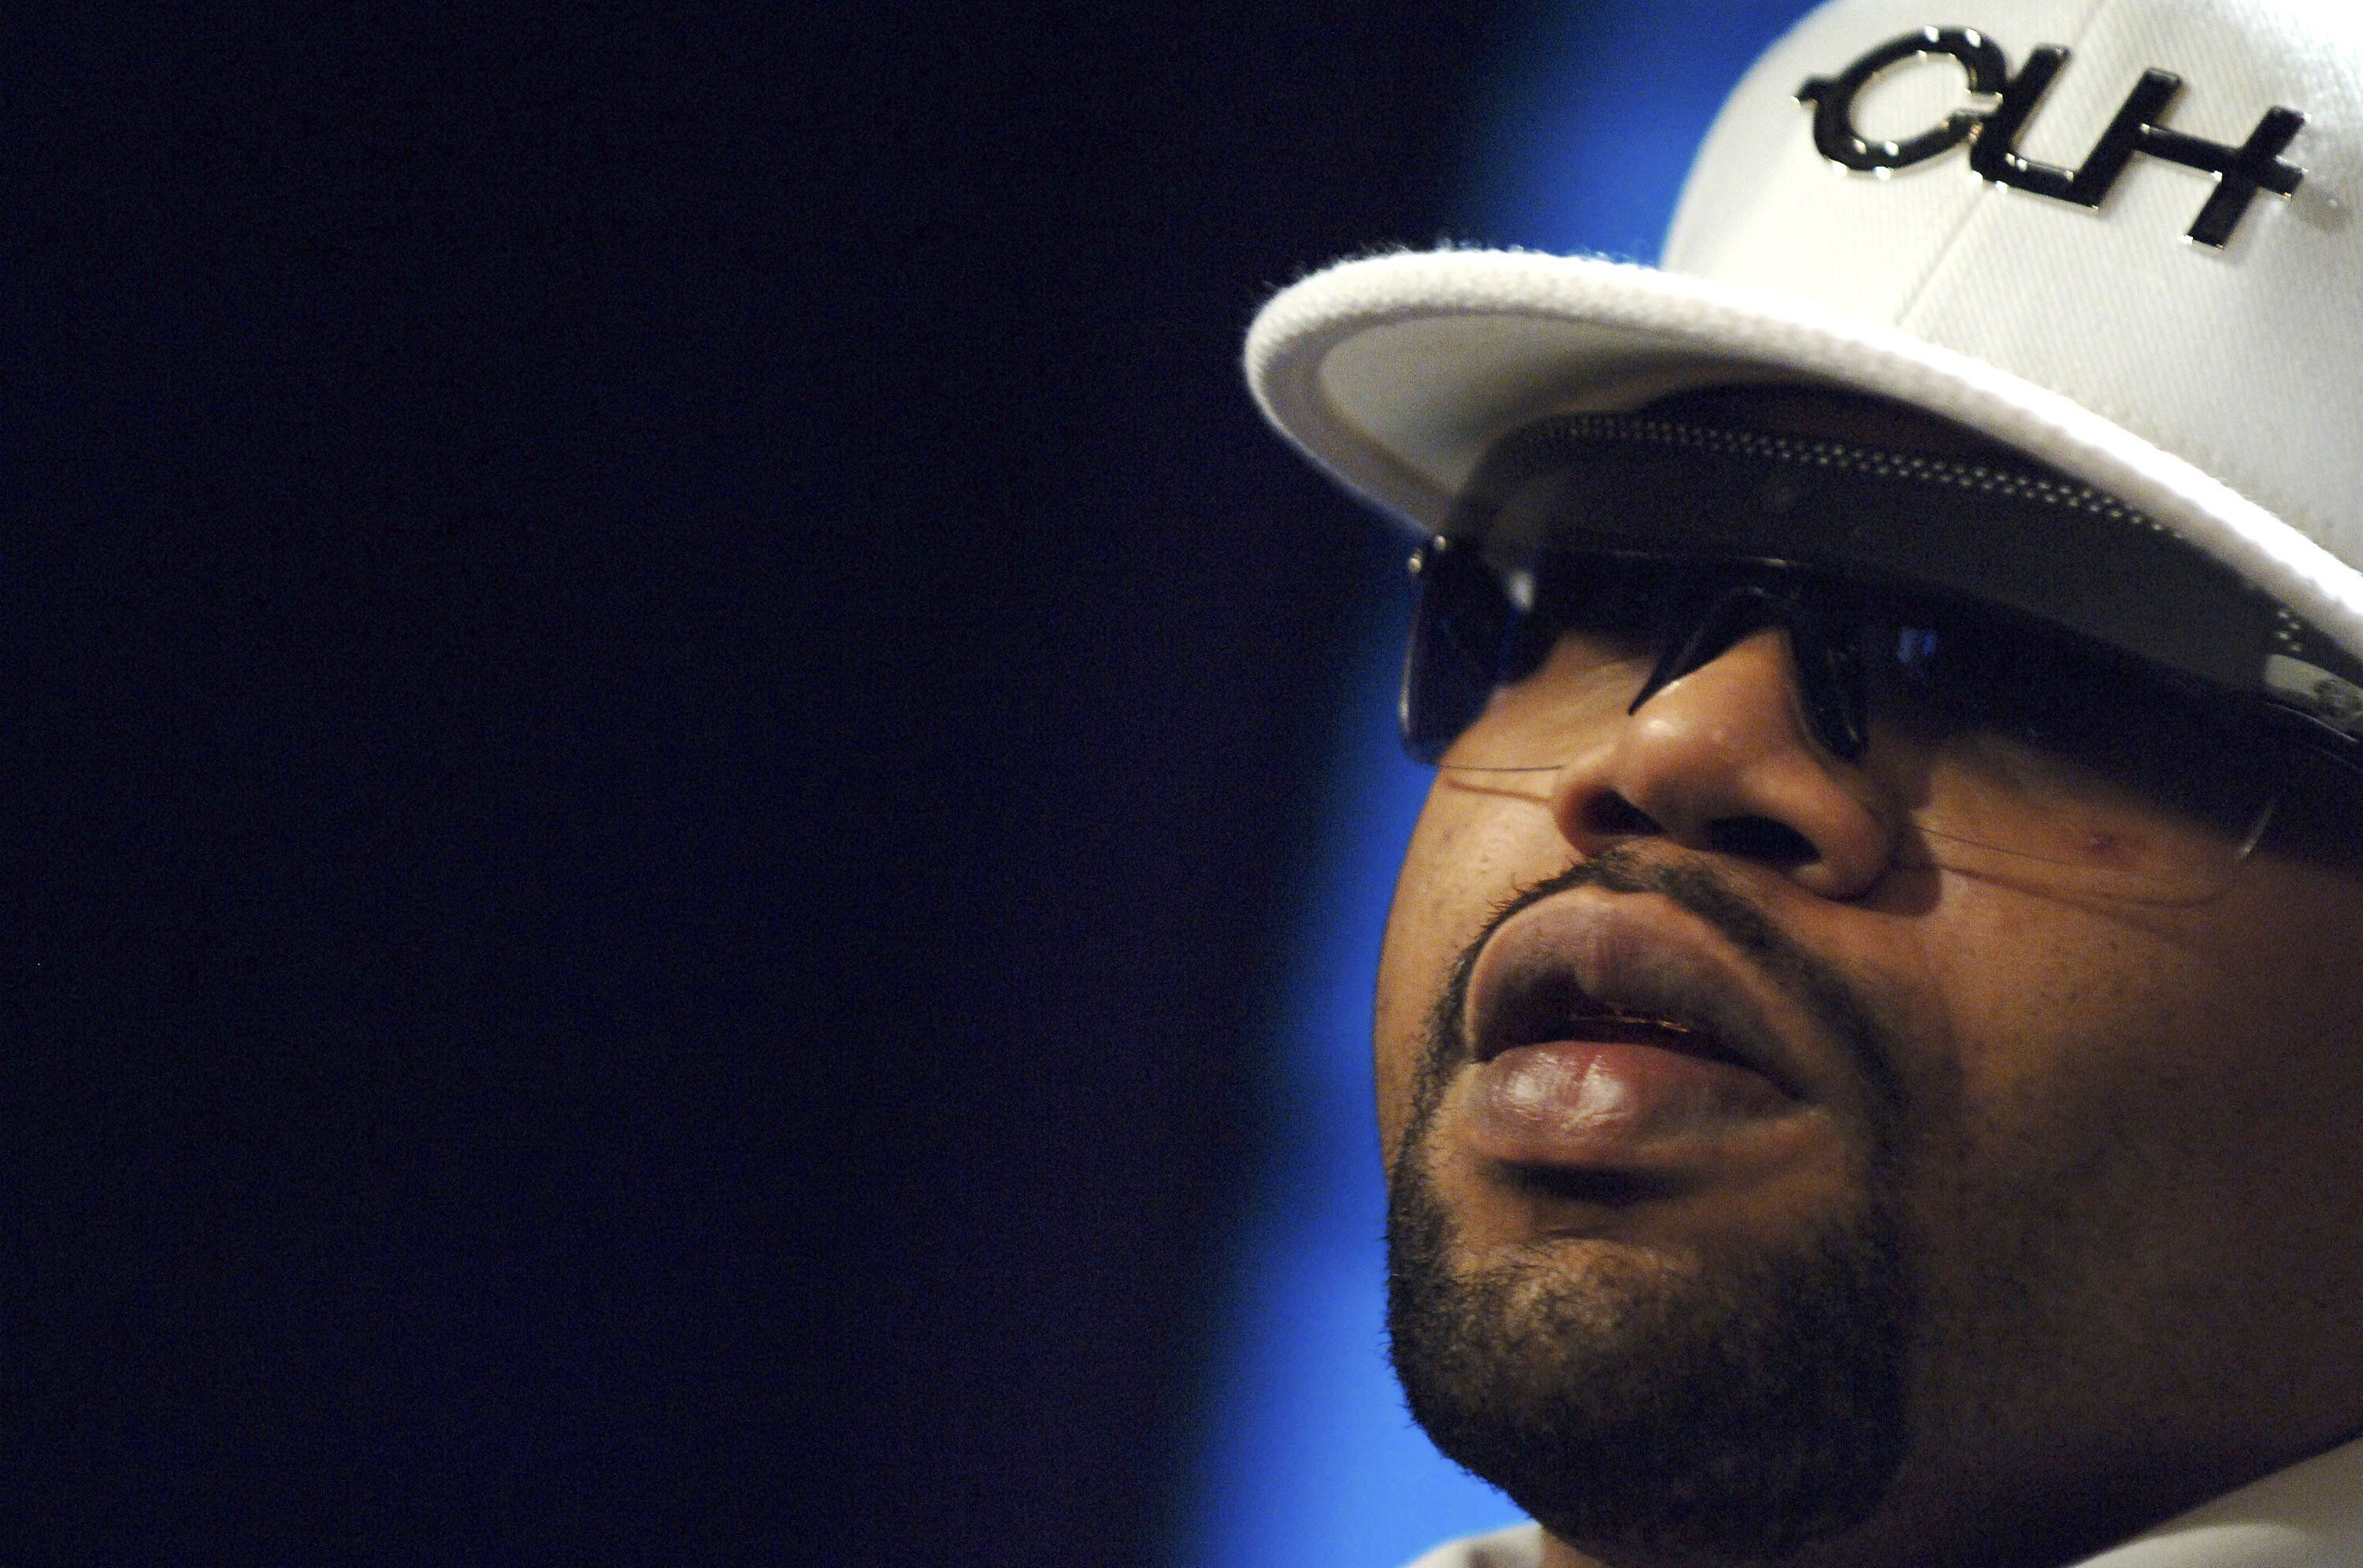 Rapper Juvenile appears on MTV2's "Sucker Free Sunday" at the MTV Times Square Studios Jan. 27, 2006, in New York City. (Photo by Bryan Bedder/Getty Images)